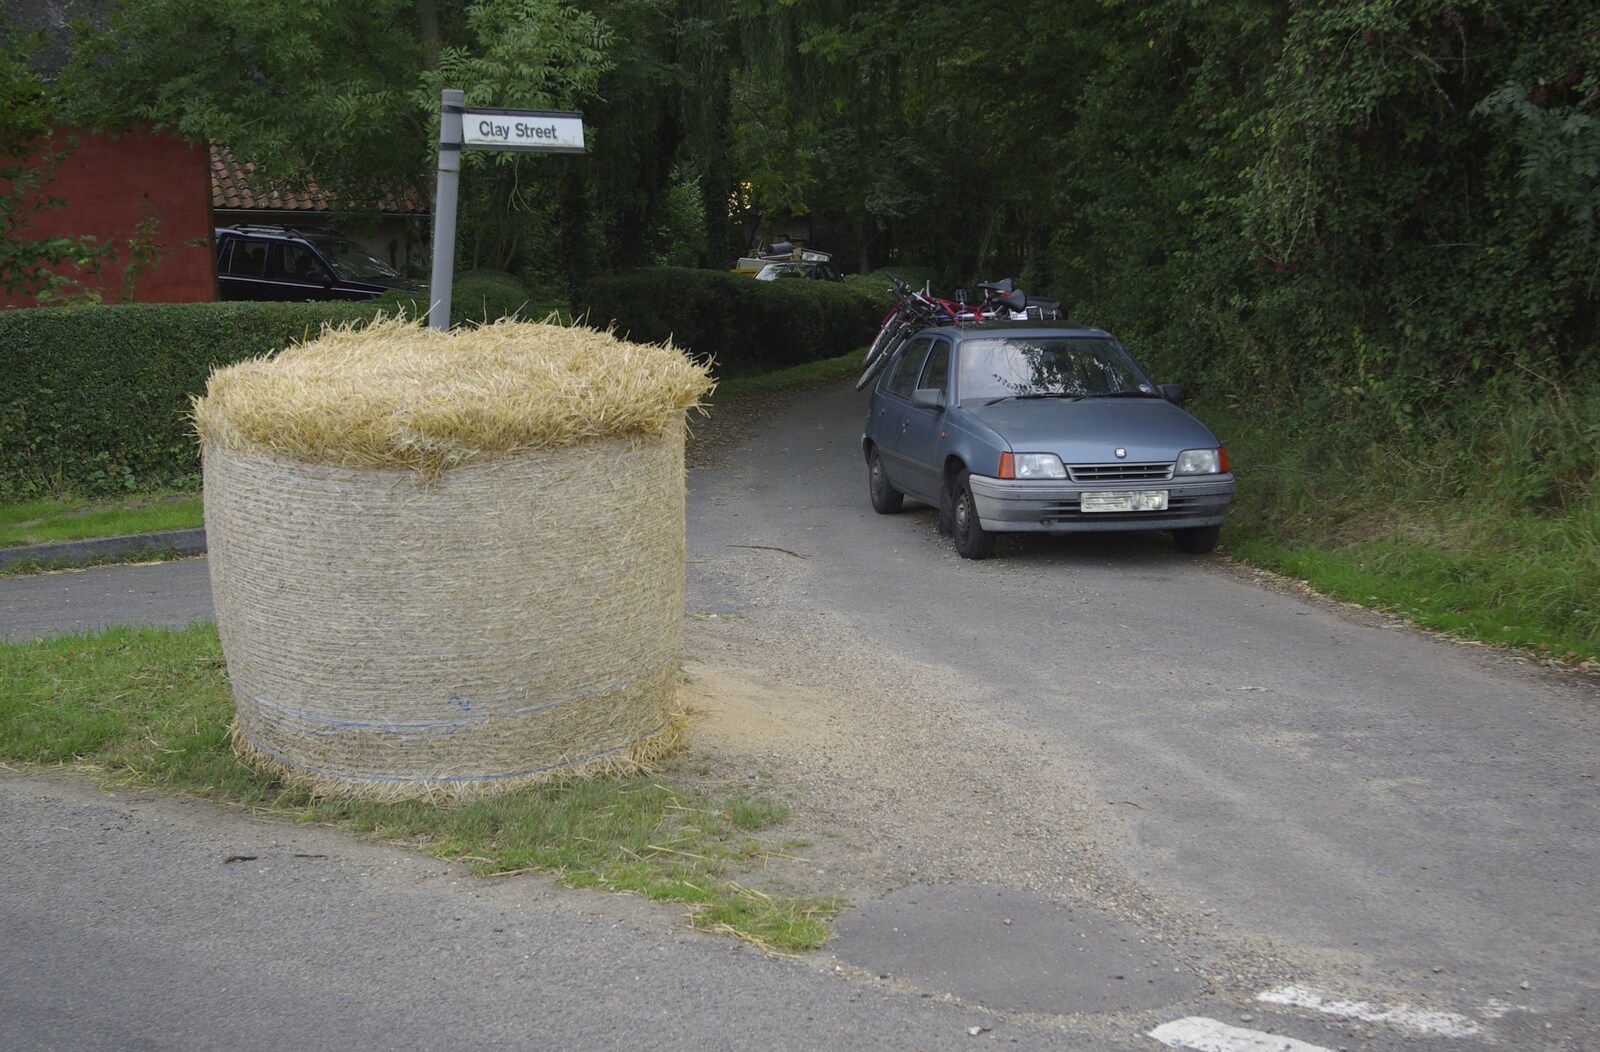 Janet's 40th, The Depot, Cambridge - 1st September 2007: In Thornham Magna, a large straw bale has been mysteriously dumped